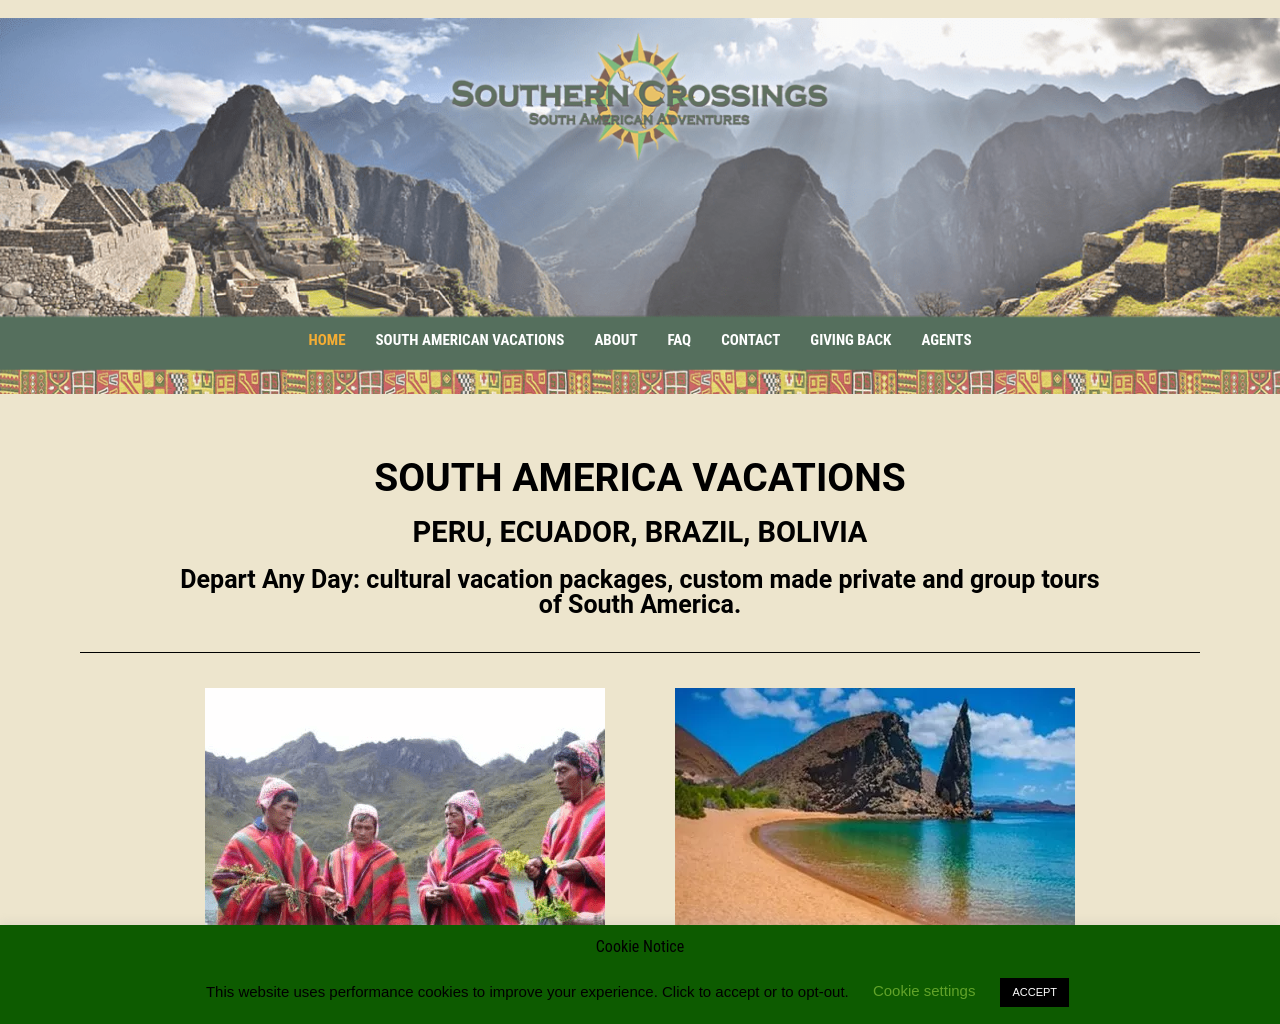 southerncrossings.com